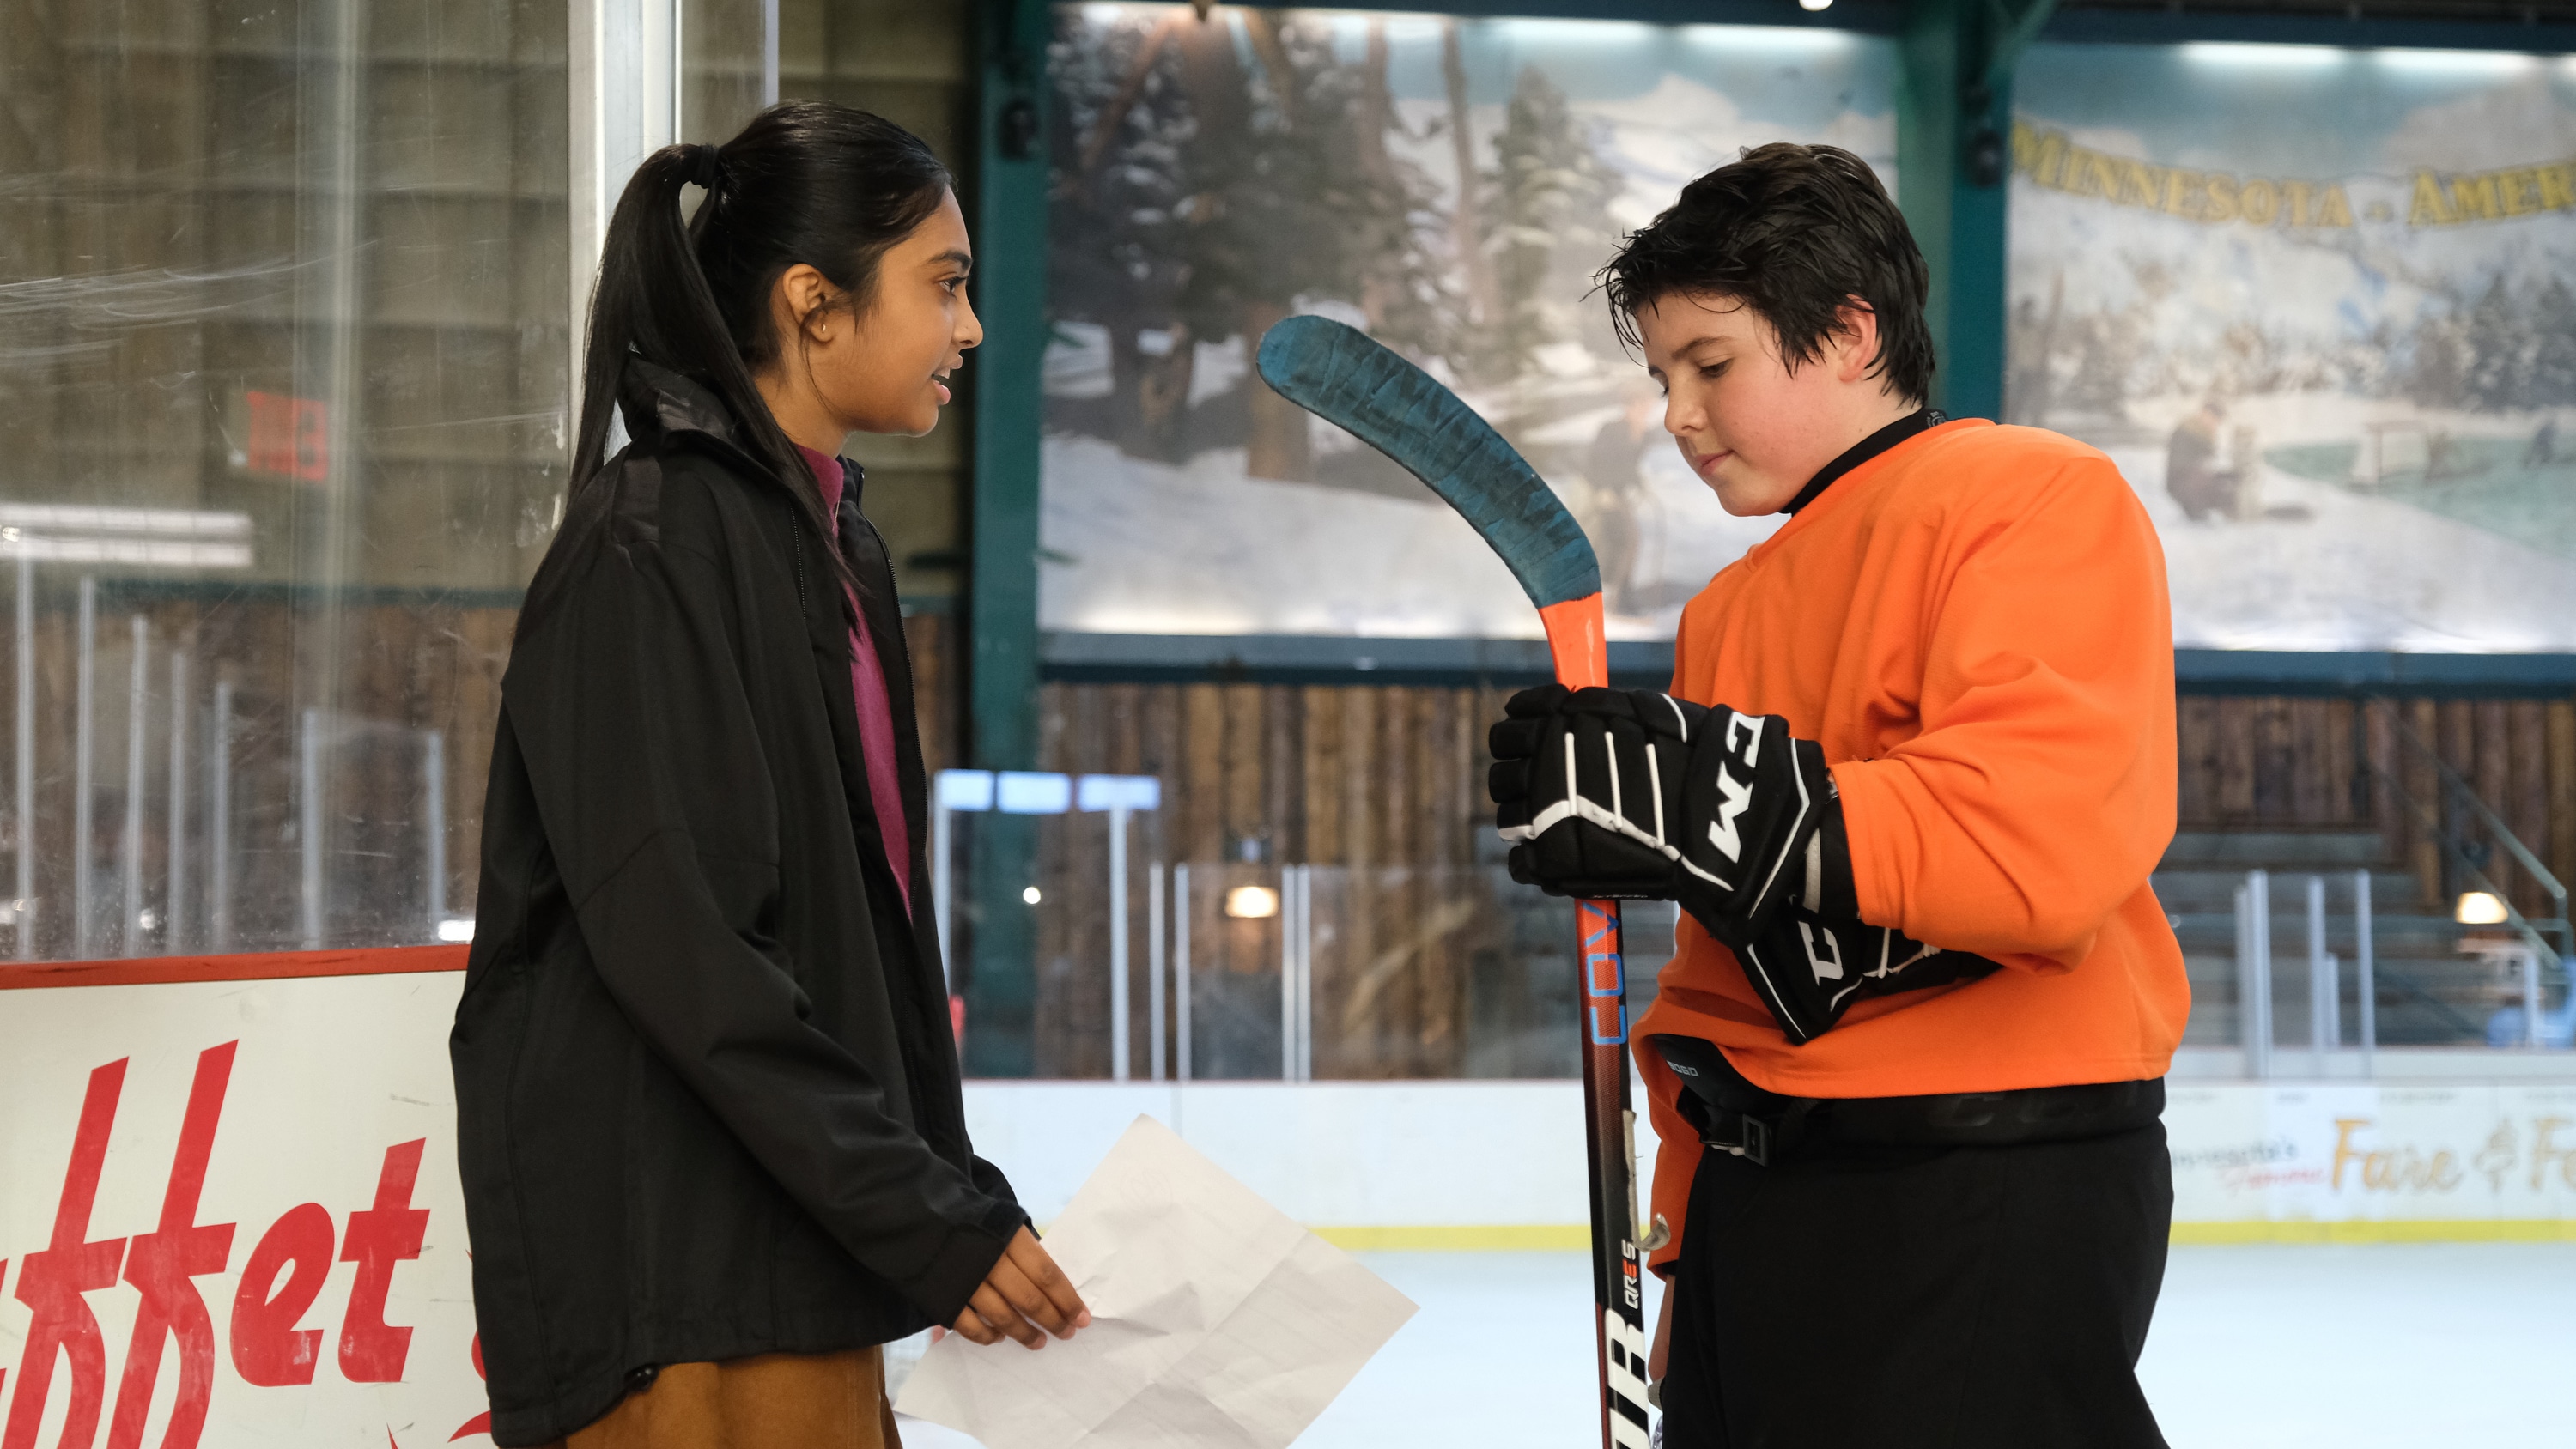 The Mighty Ducks: Game Changers, Episode 6 Review